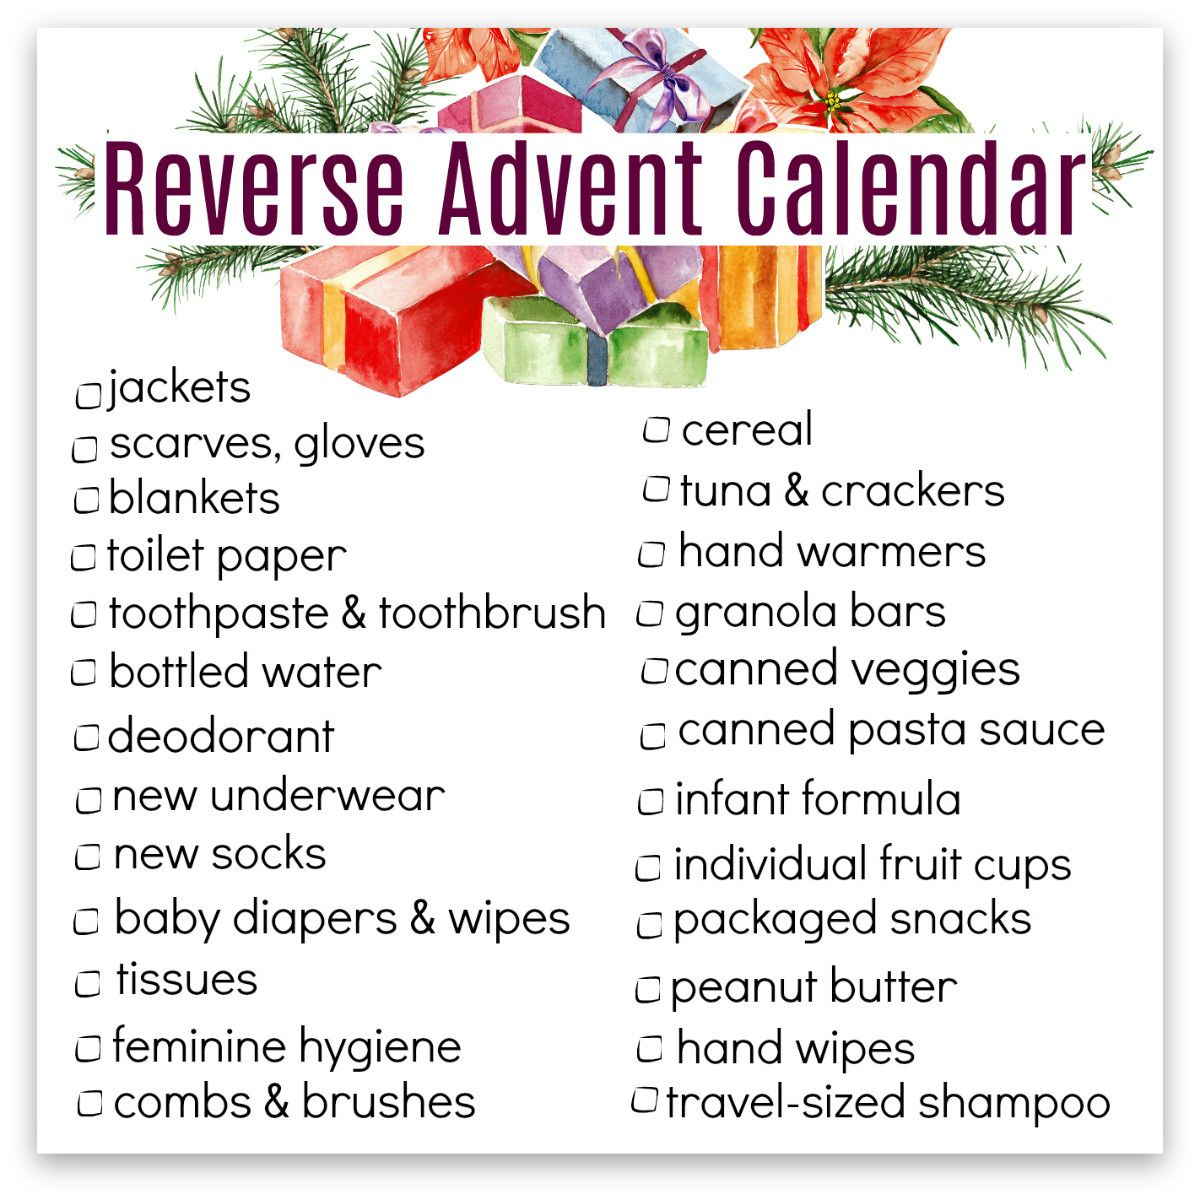 Give Back This Season With A Reverse Advent Calendar intended for Reverse Advent Calendar Template